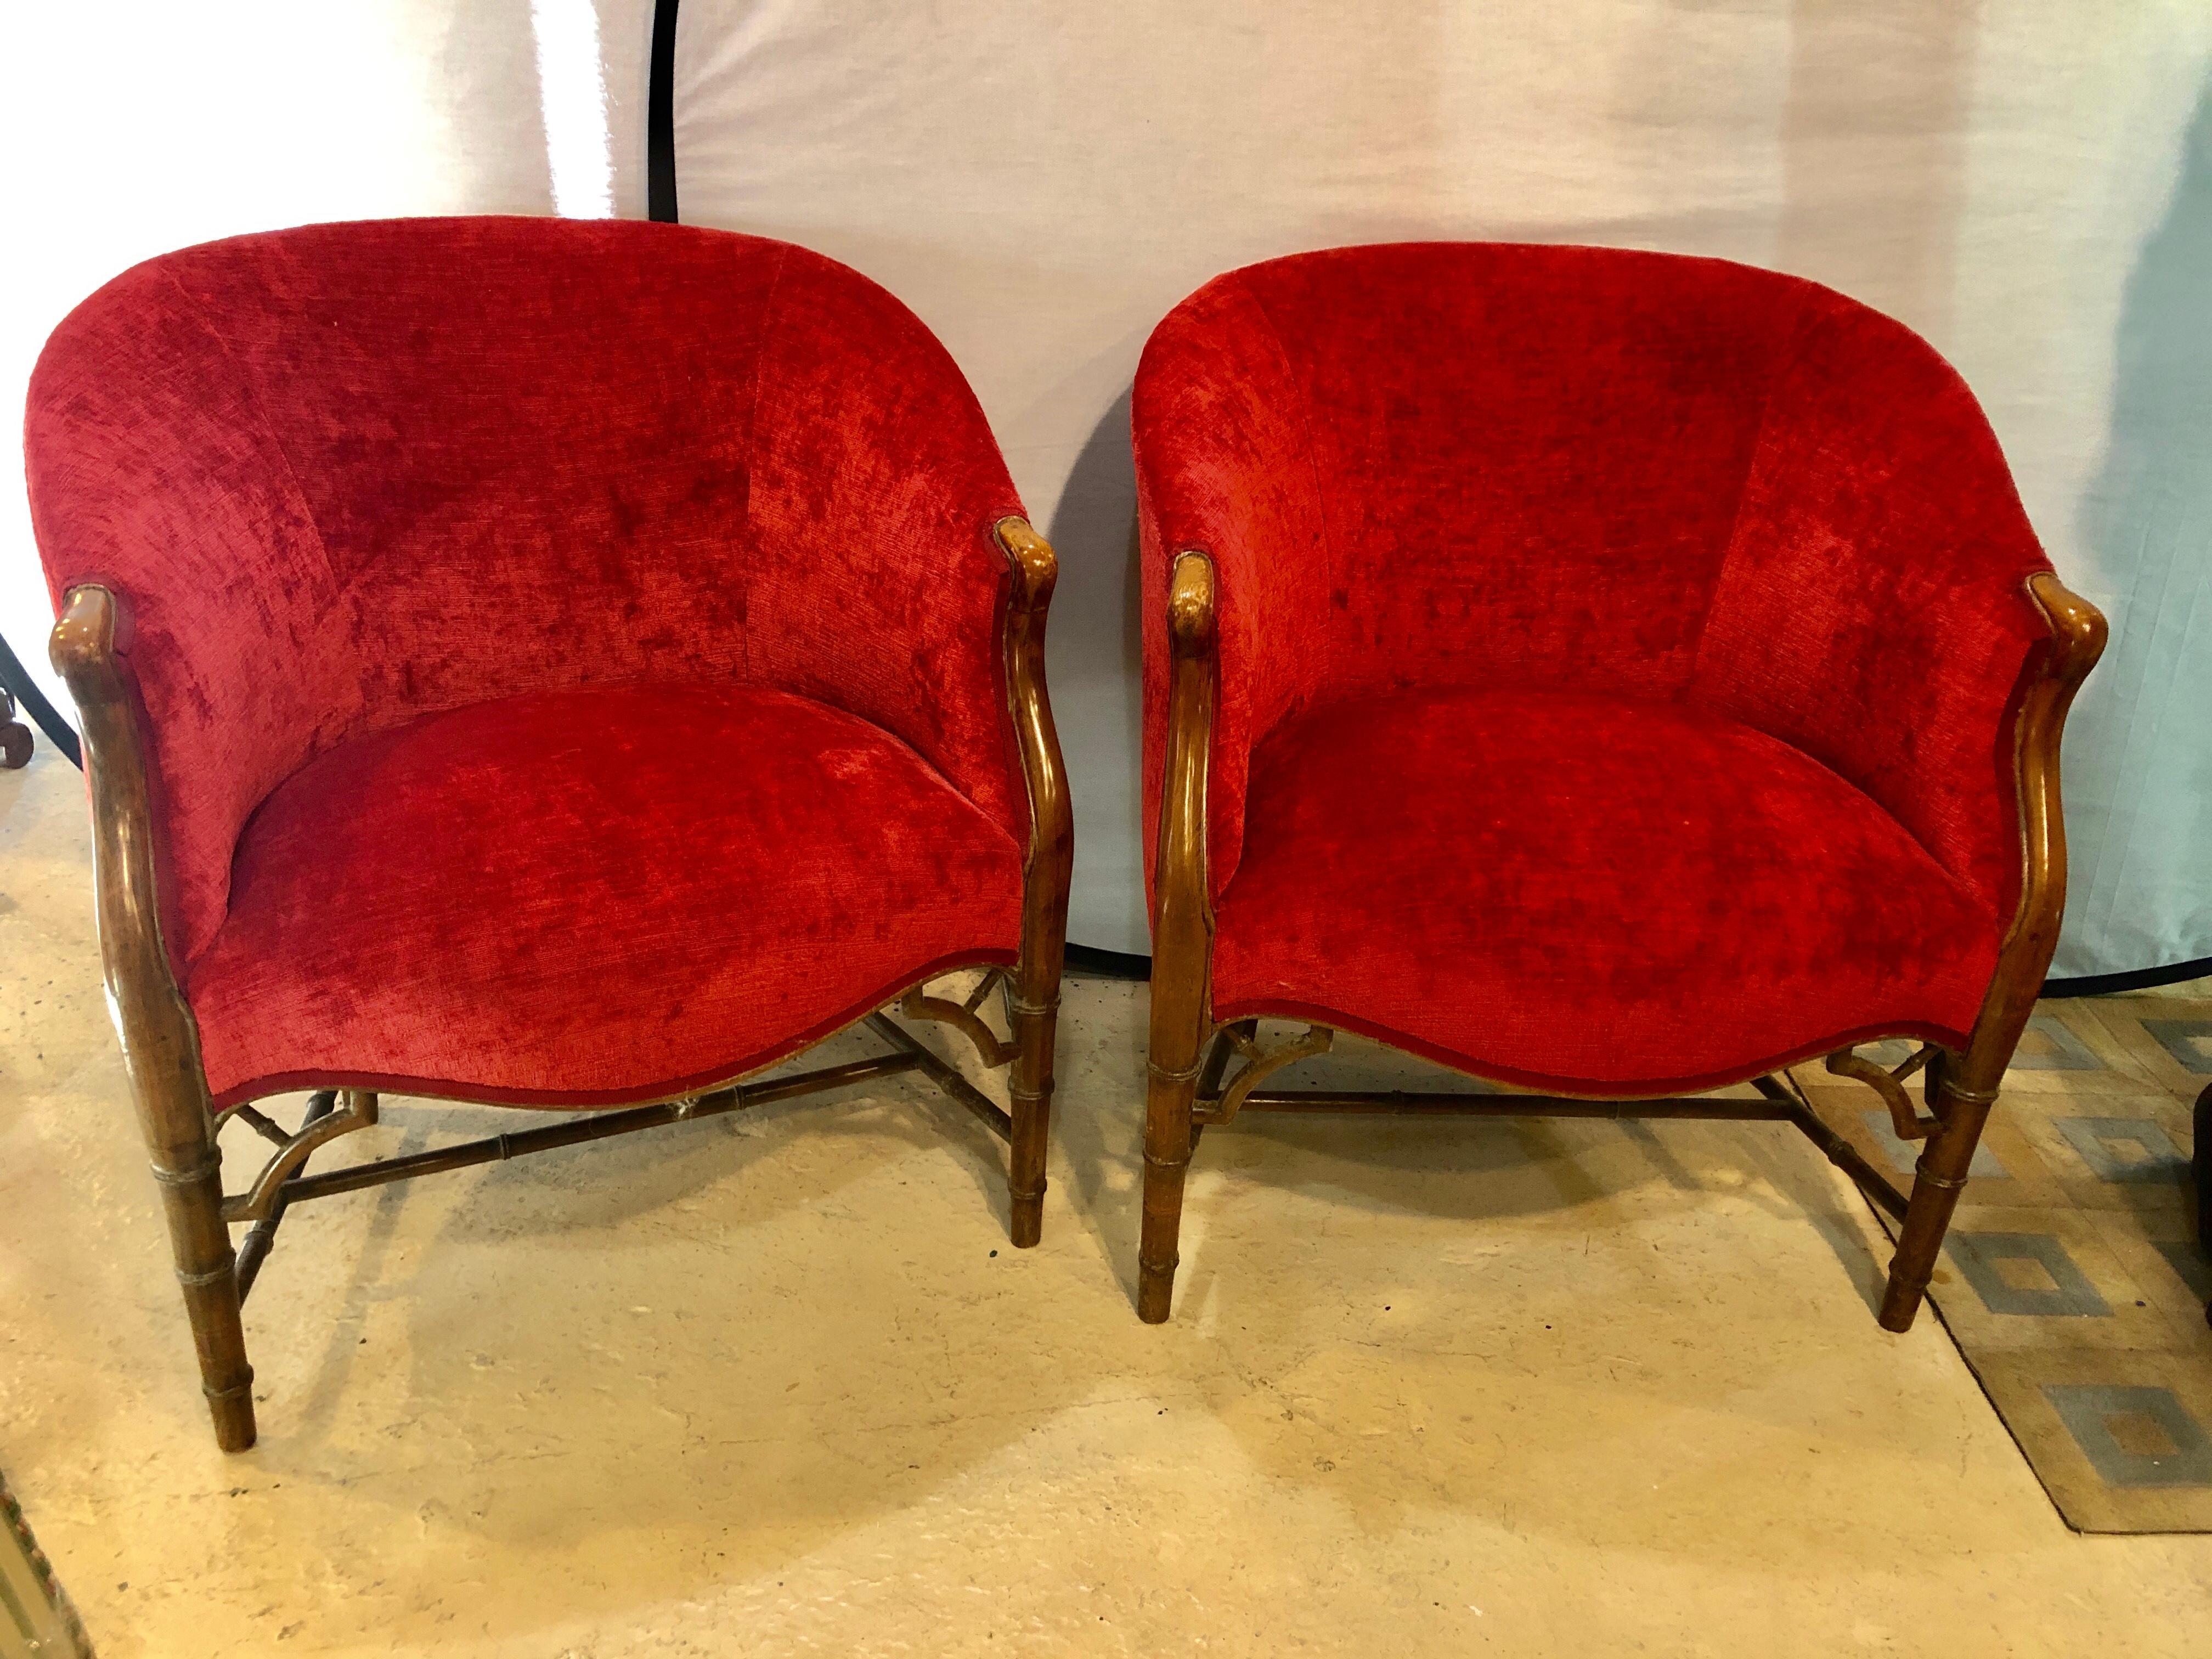 Pair of bamboo legged cherry red velour 19th-20th century barrel back chairs. Sleek and stylish are this Fine pair of custom quality designer armchairs in a walnut wood frame. Strong, sturdy and comfortable.